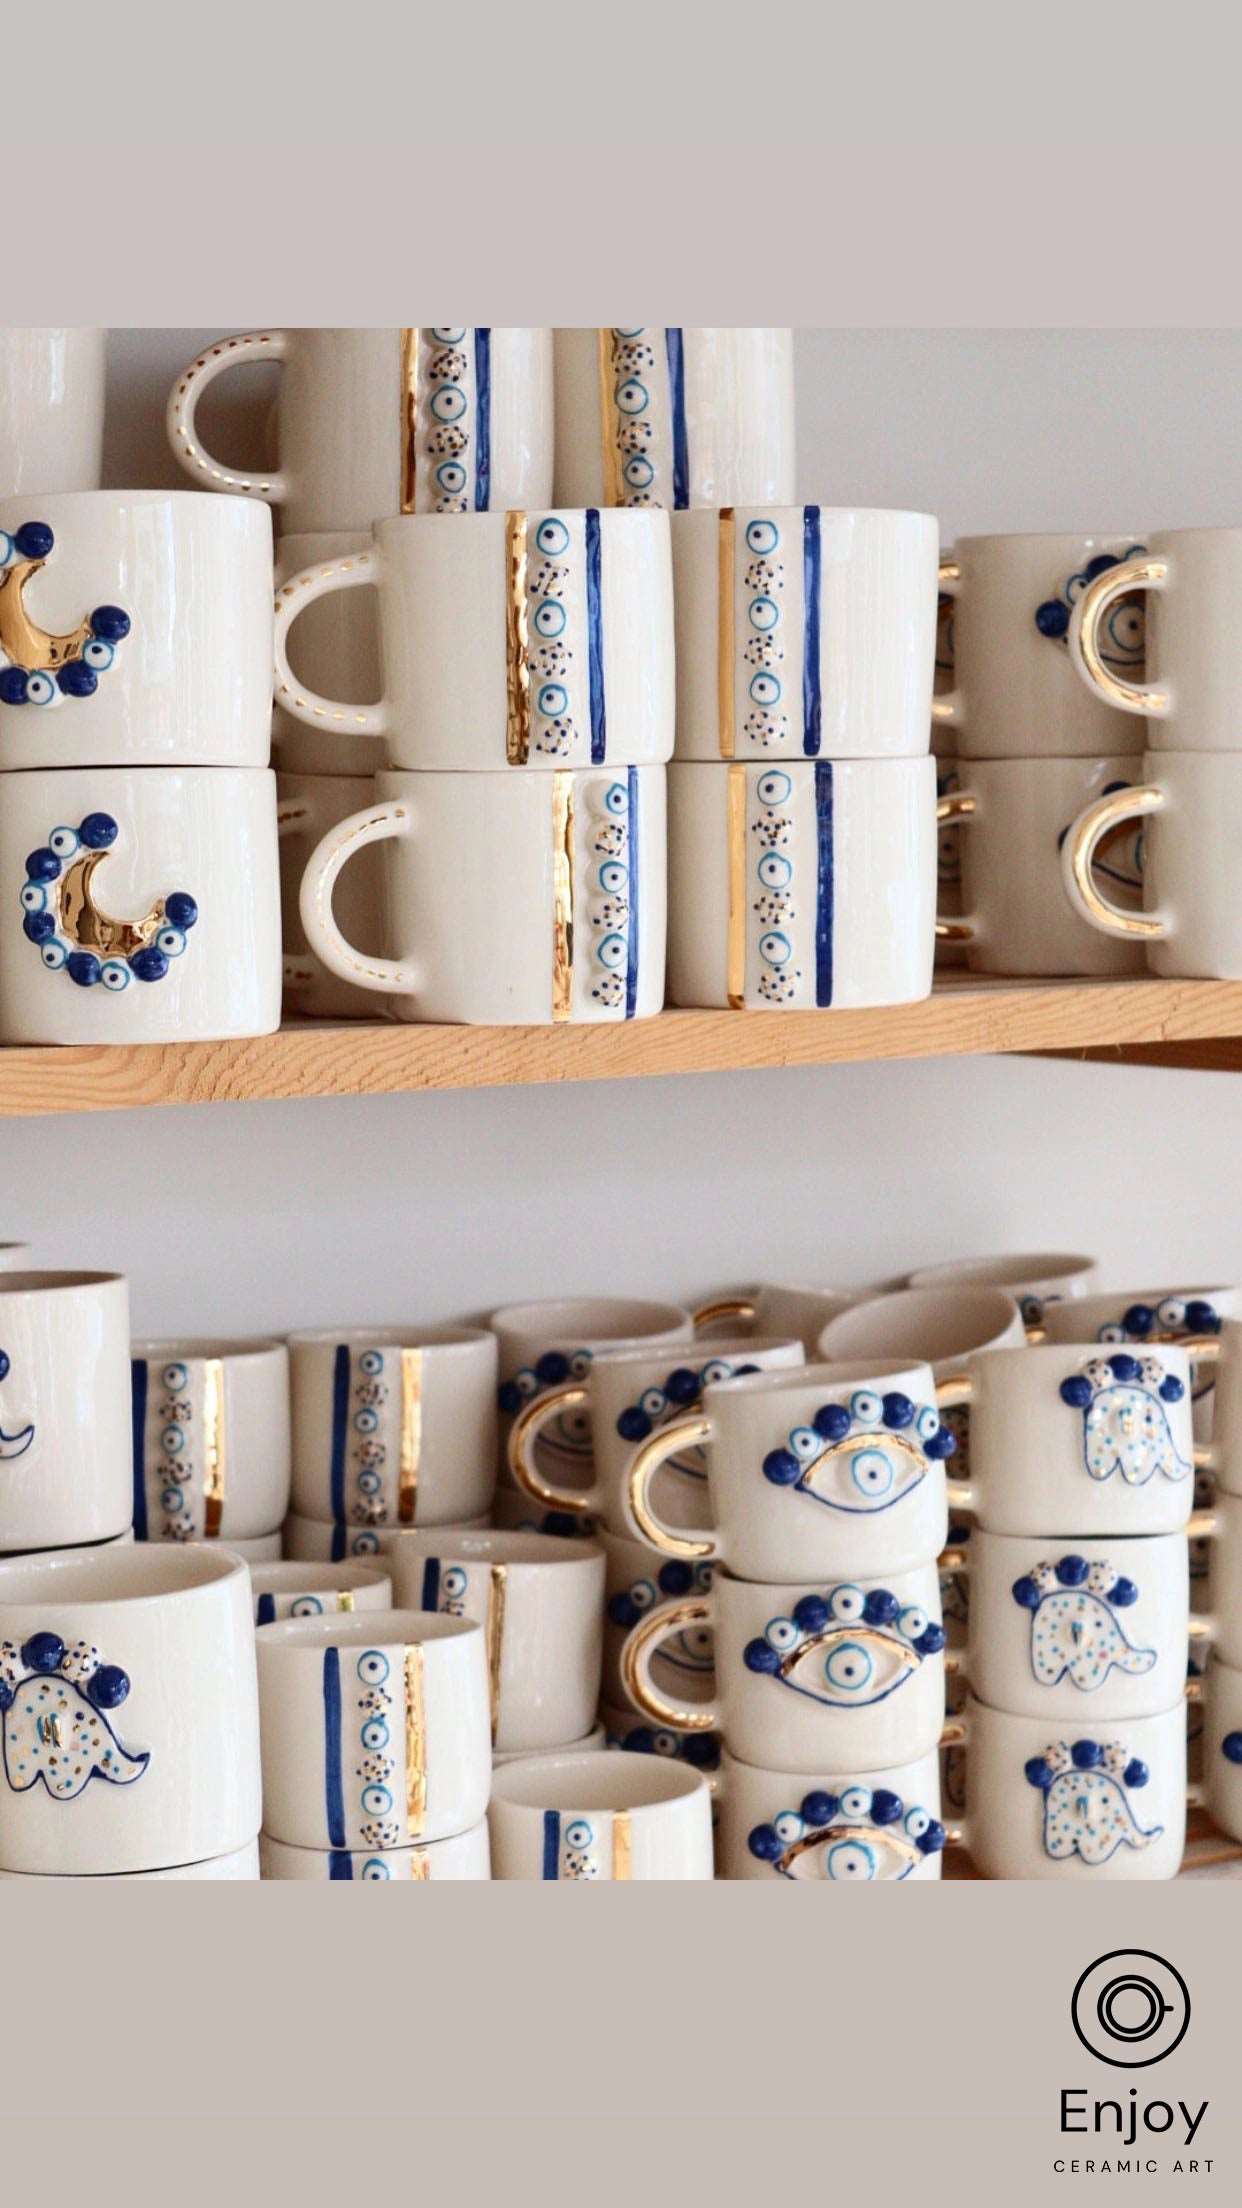 A collection of white ceramic mugs with golden accents and various blue evil eye designs neatly arranged on wooden shelves. The designs include crescent moons, hamsa hands, stripes of multiple evil eyes, and more, creating an aesthetically pleasing display with a cultural touch.